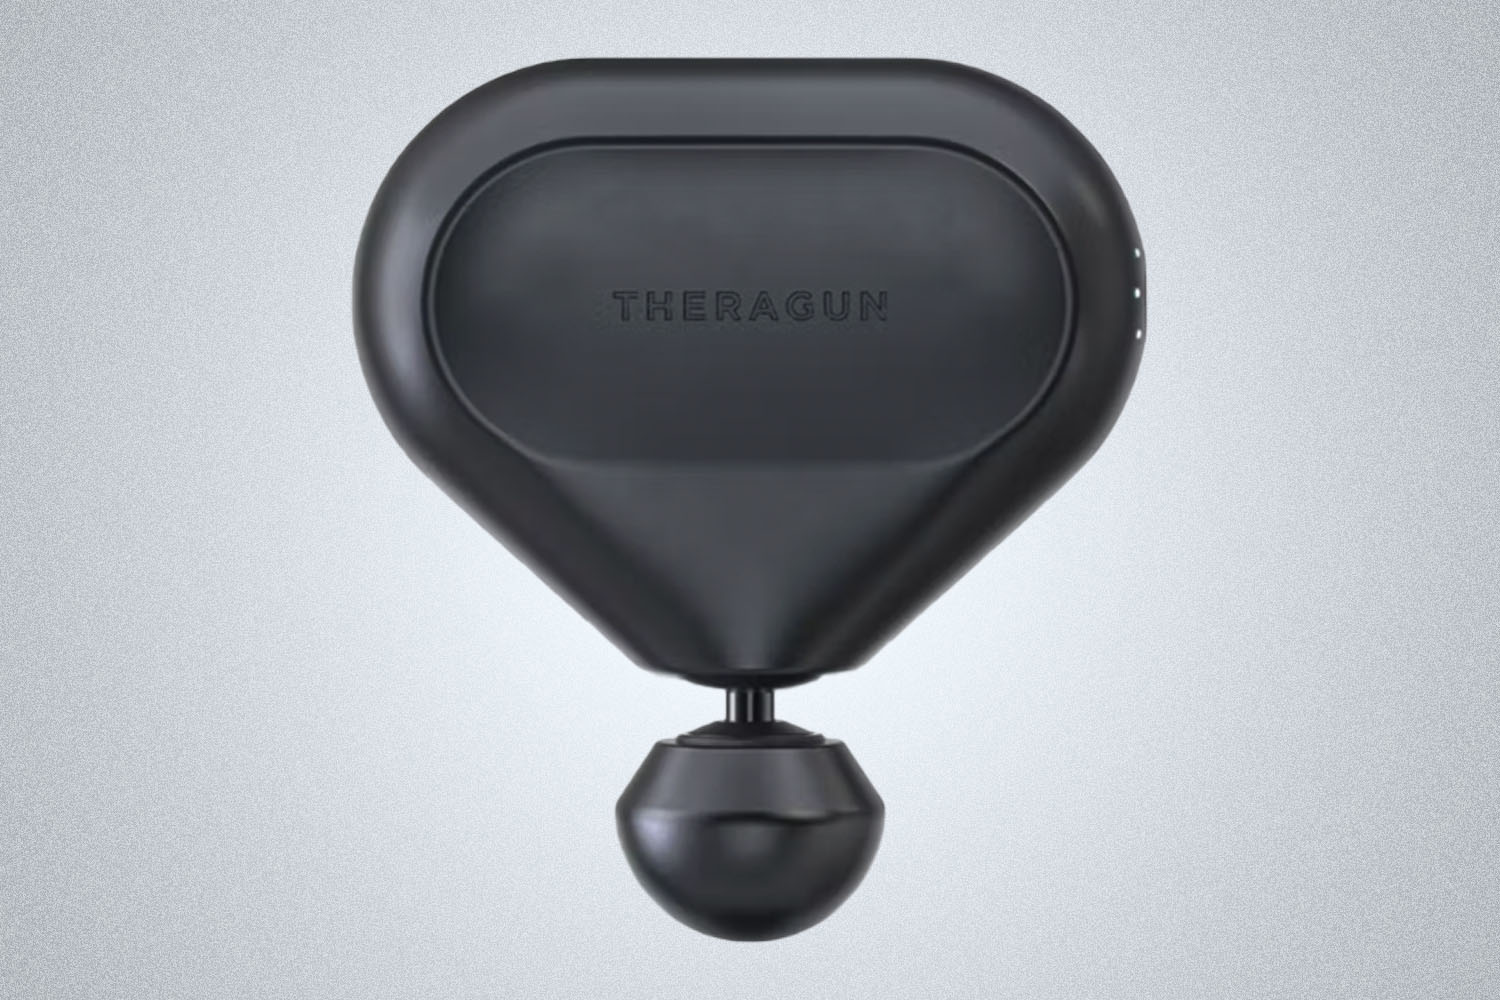 a black percussive massive tool from Therabody on a grey background